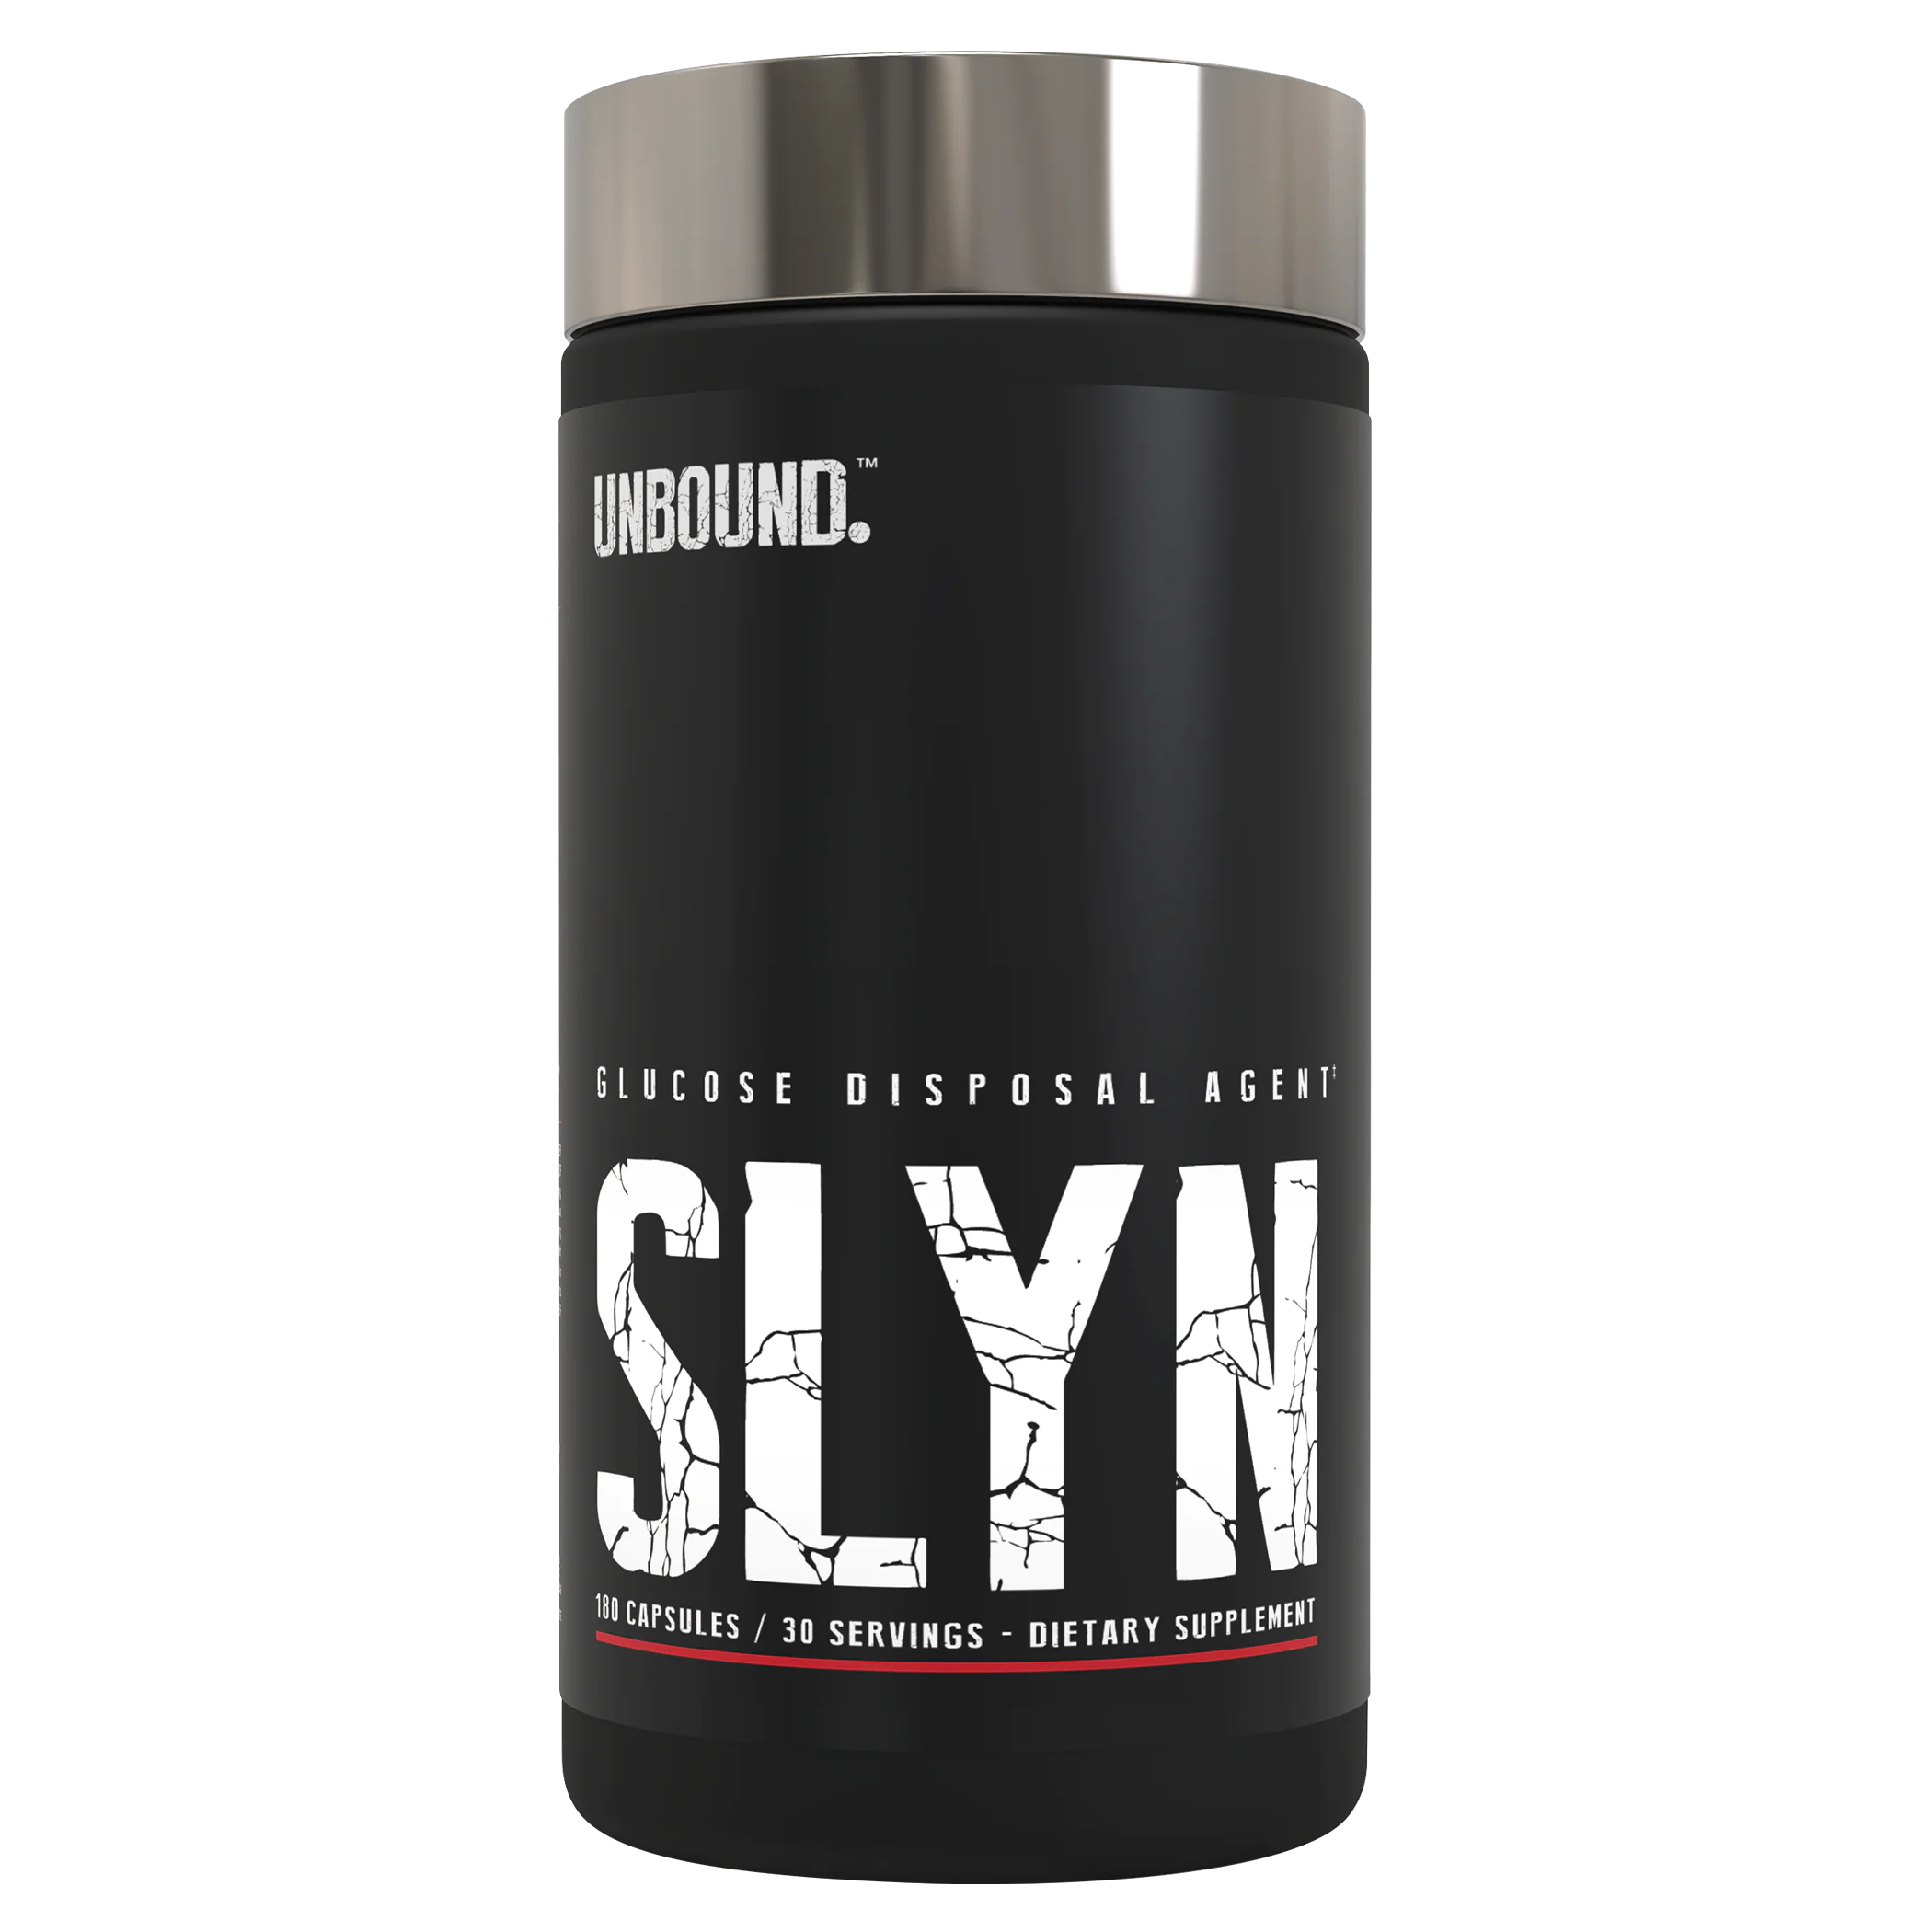 Unbound SLYN Glucose Disposal Agent 180 Capsules